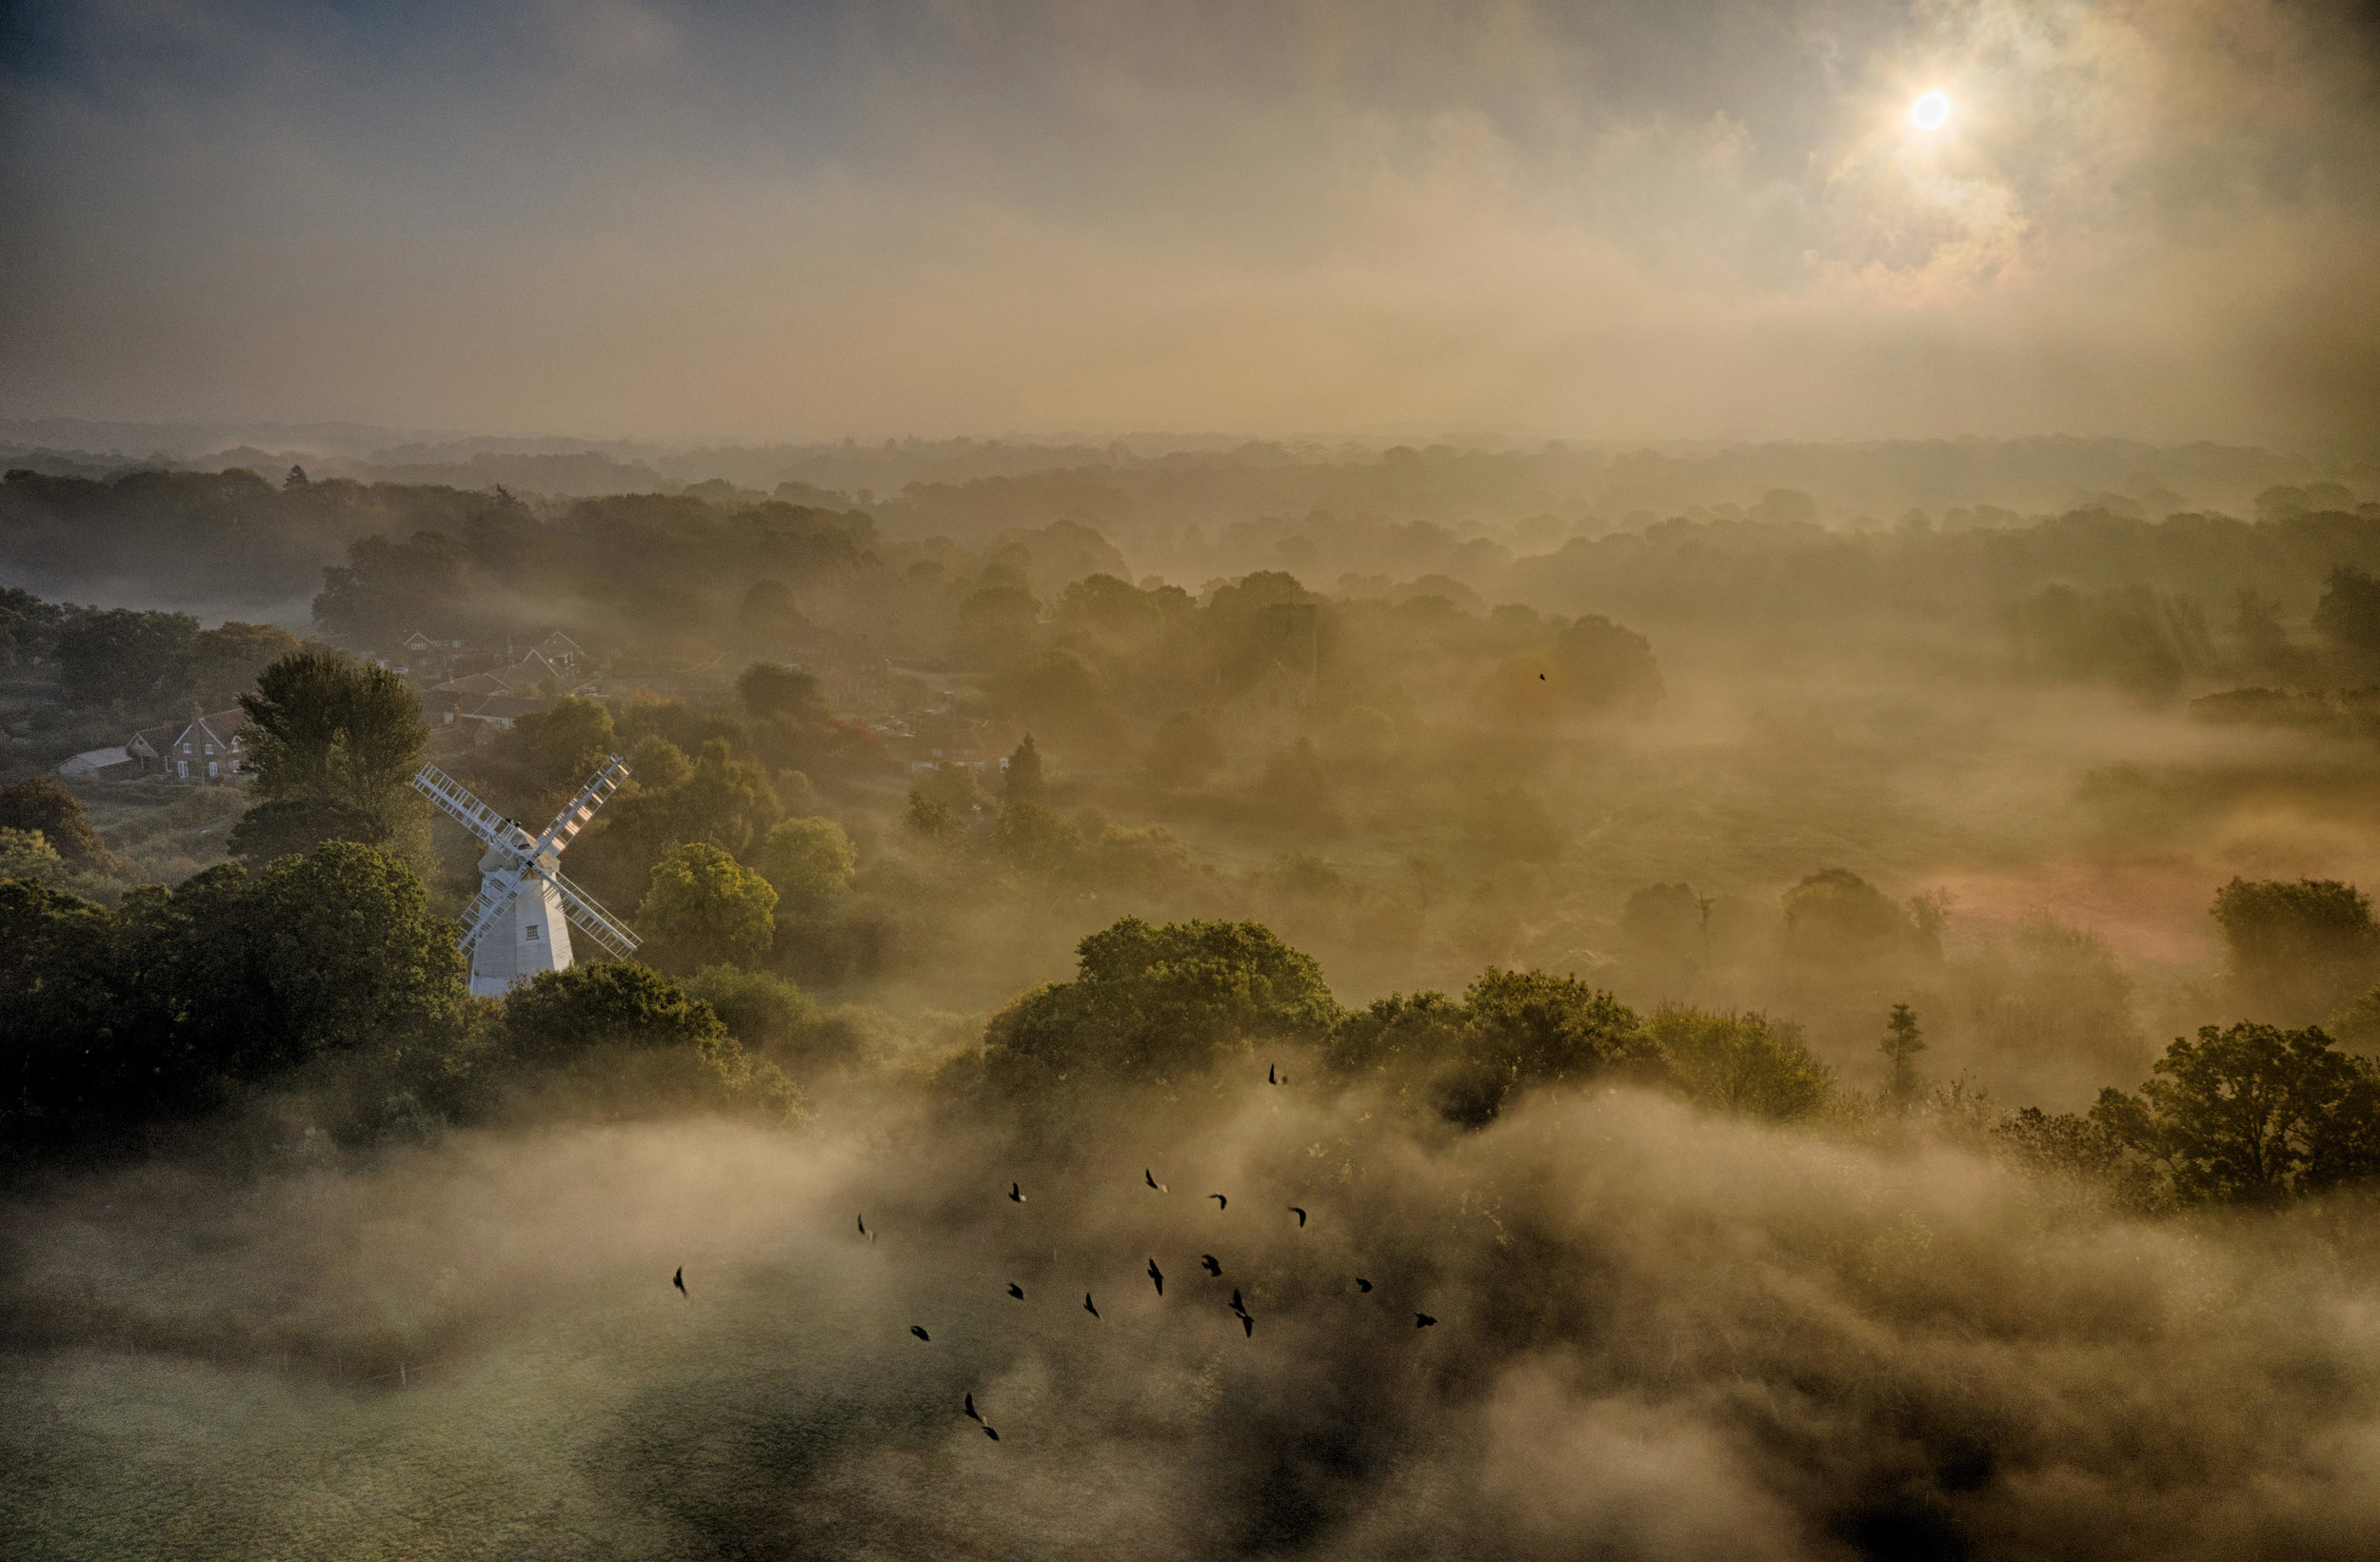  The morning mist swirls around Shipley Windmill in West Sussex, made famous as the home of fictional television detective Jonathon Creek, on what was to become one of the hottest October days on record.
Photo by Chris Gorman, 10 October 2018
 